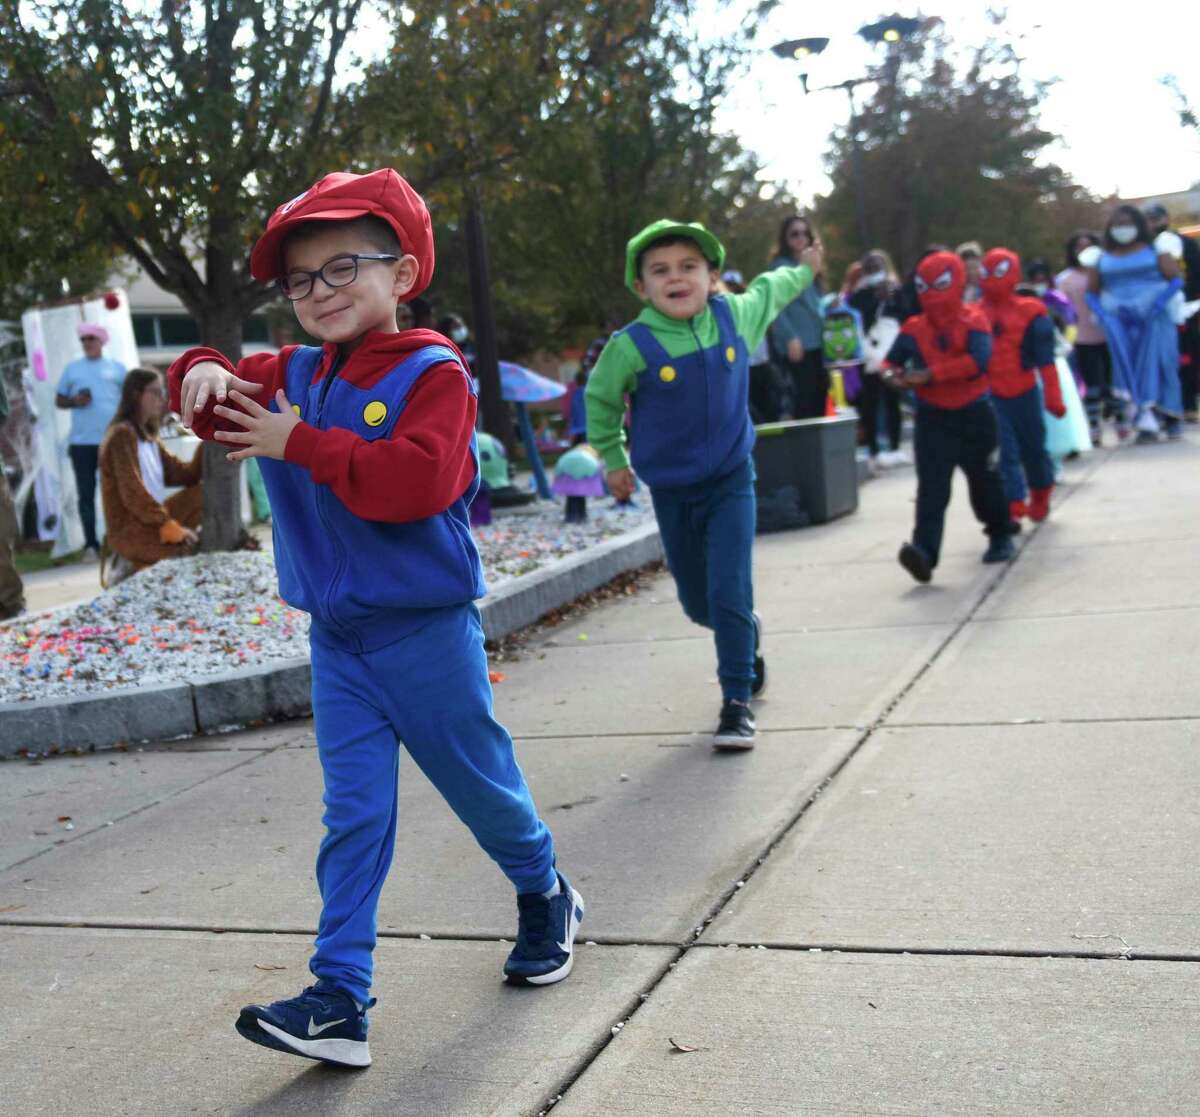 Stamford's Marco Fusaro, and his brother, Matteo Fusaro, both 6, are dressed as Mario and Luigi in the costume contest at the Tech or Treat Halloween event at J.M. Wright Technical High School in Stamford Sunday. The spooky event featured a kids costume contest, pumpkin painting, game stations, spooky vignettes made by students, a DJ, and 'Bone' Appétit cafe.